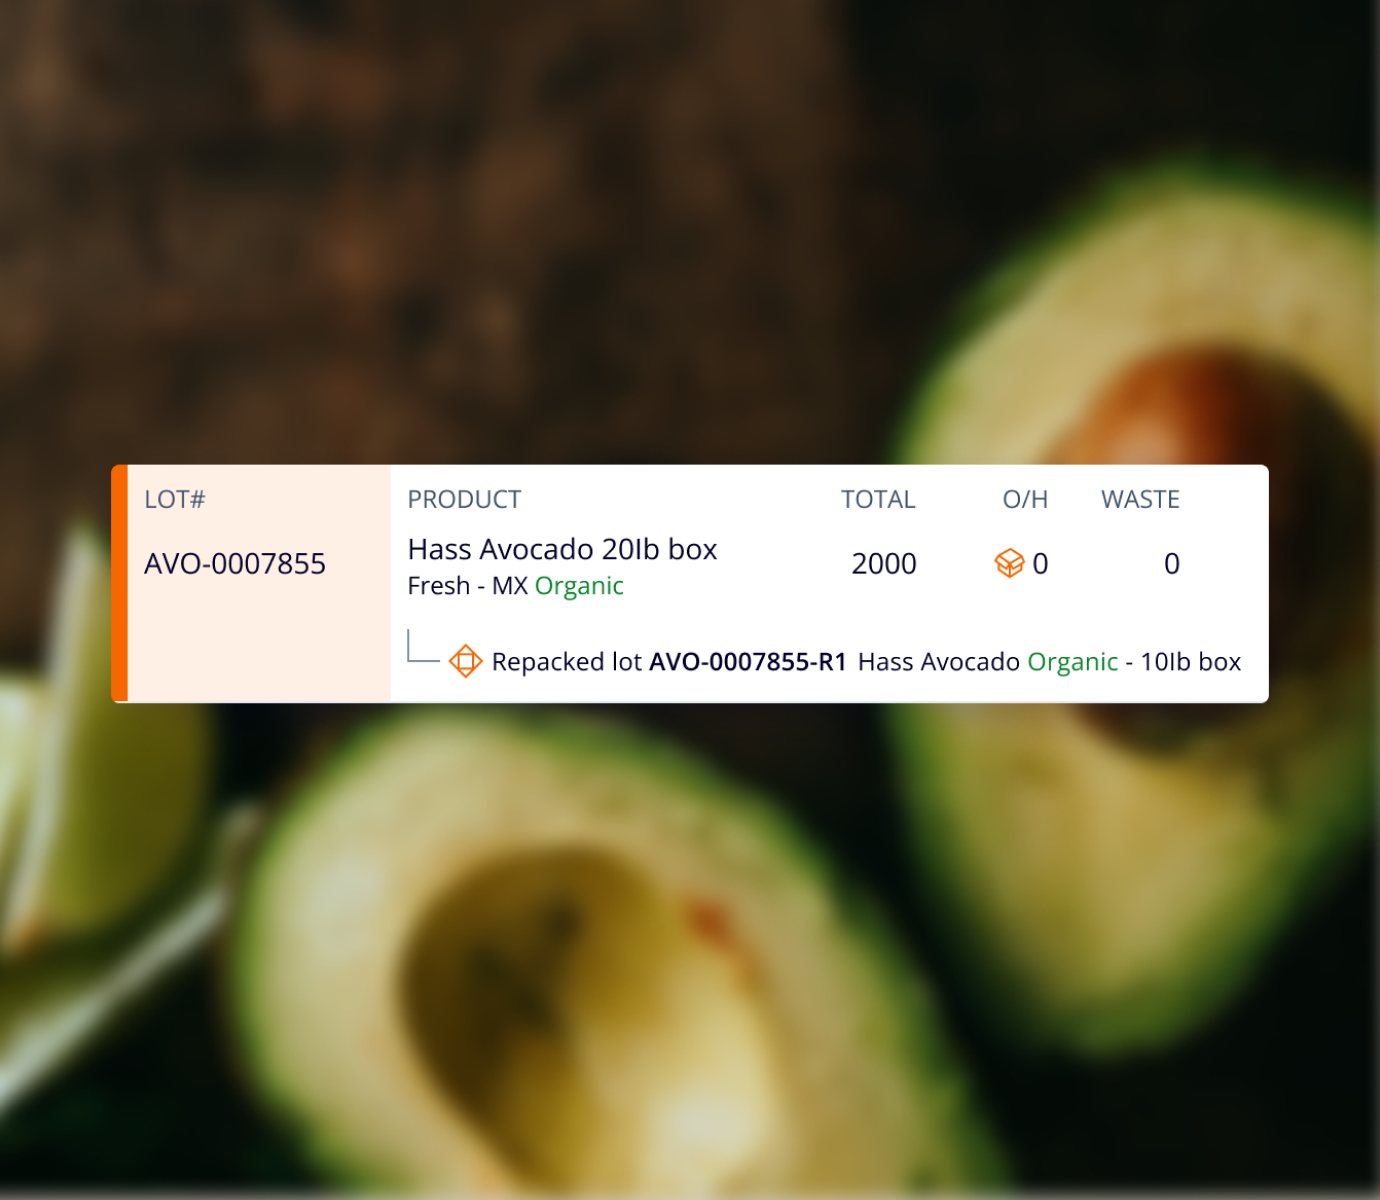 Screenshot of performance metrics in Silo's software on a backdrop of avocados